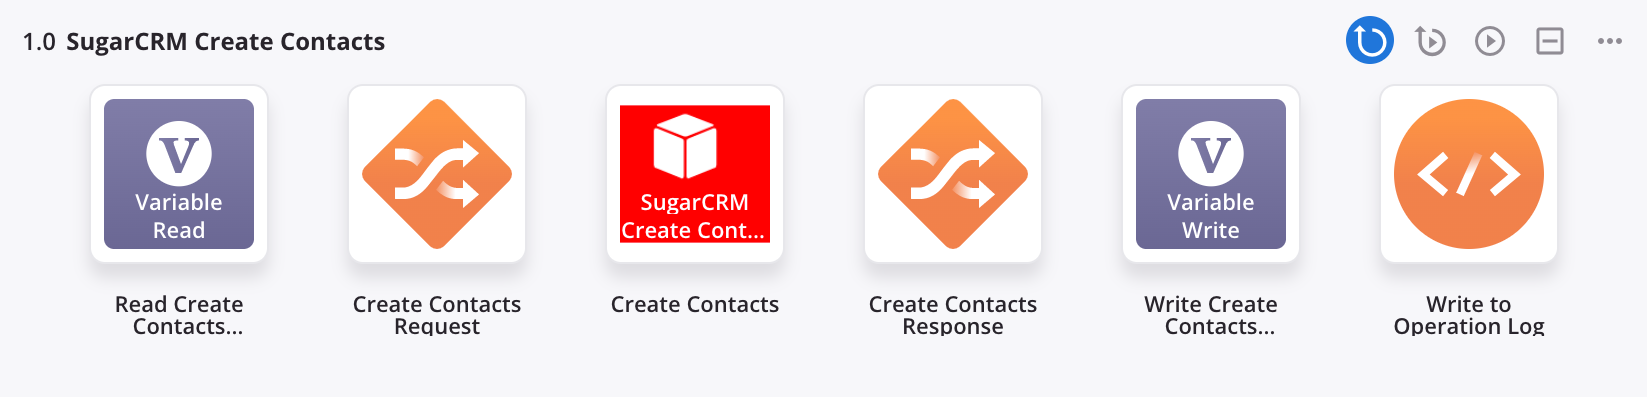 SugarCRM Create Contacts operation